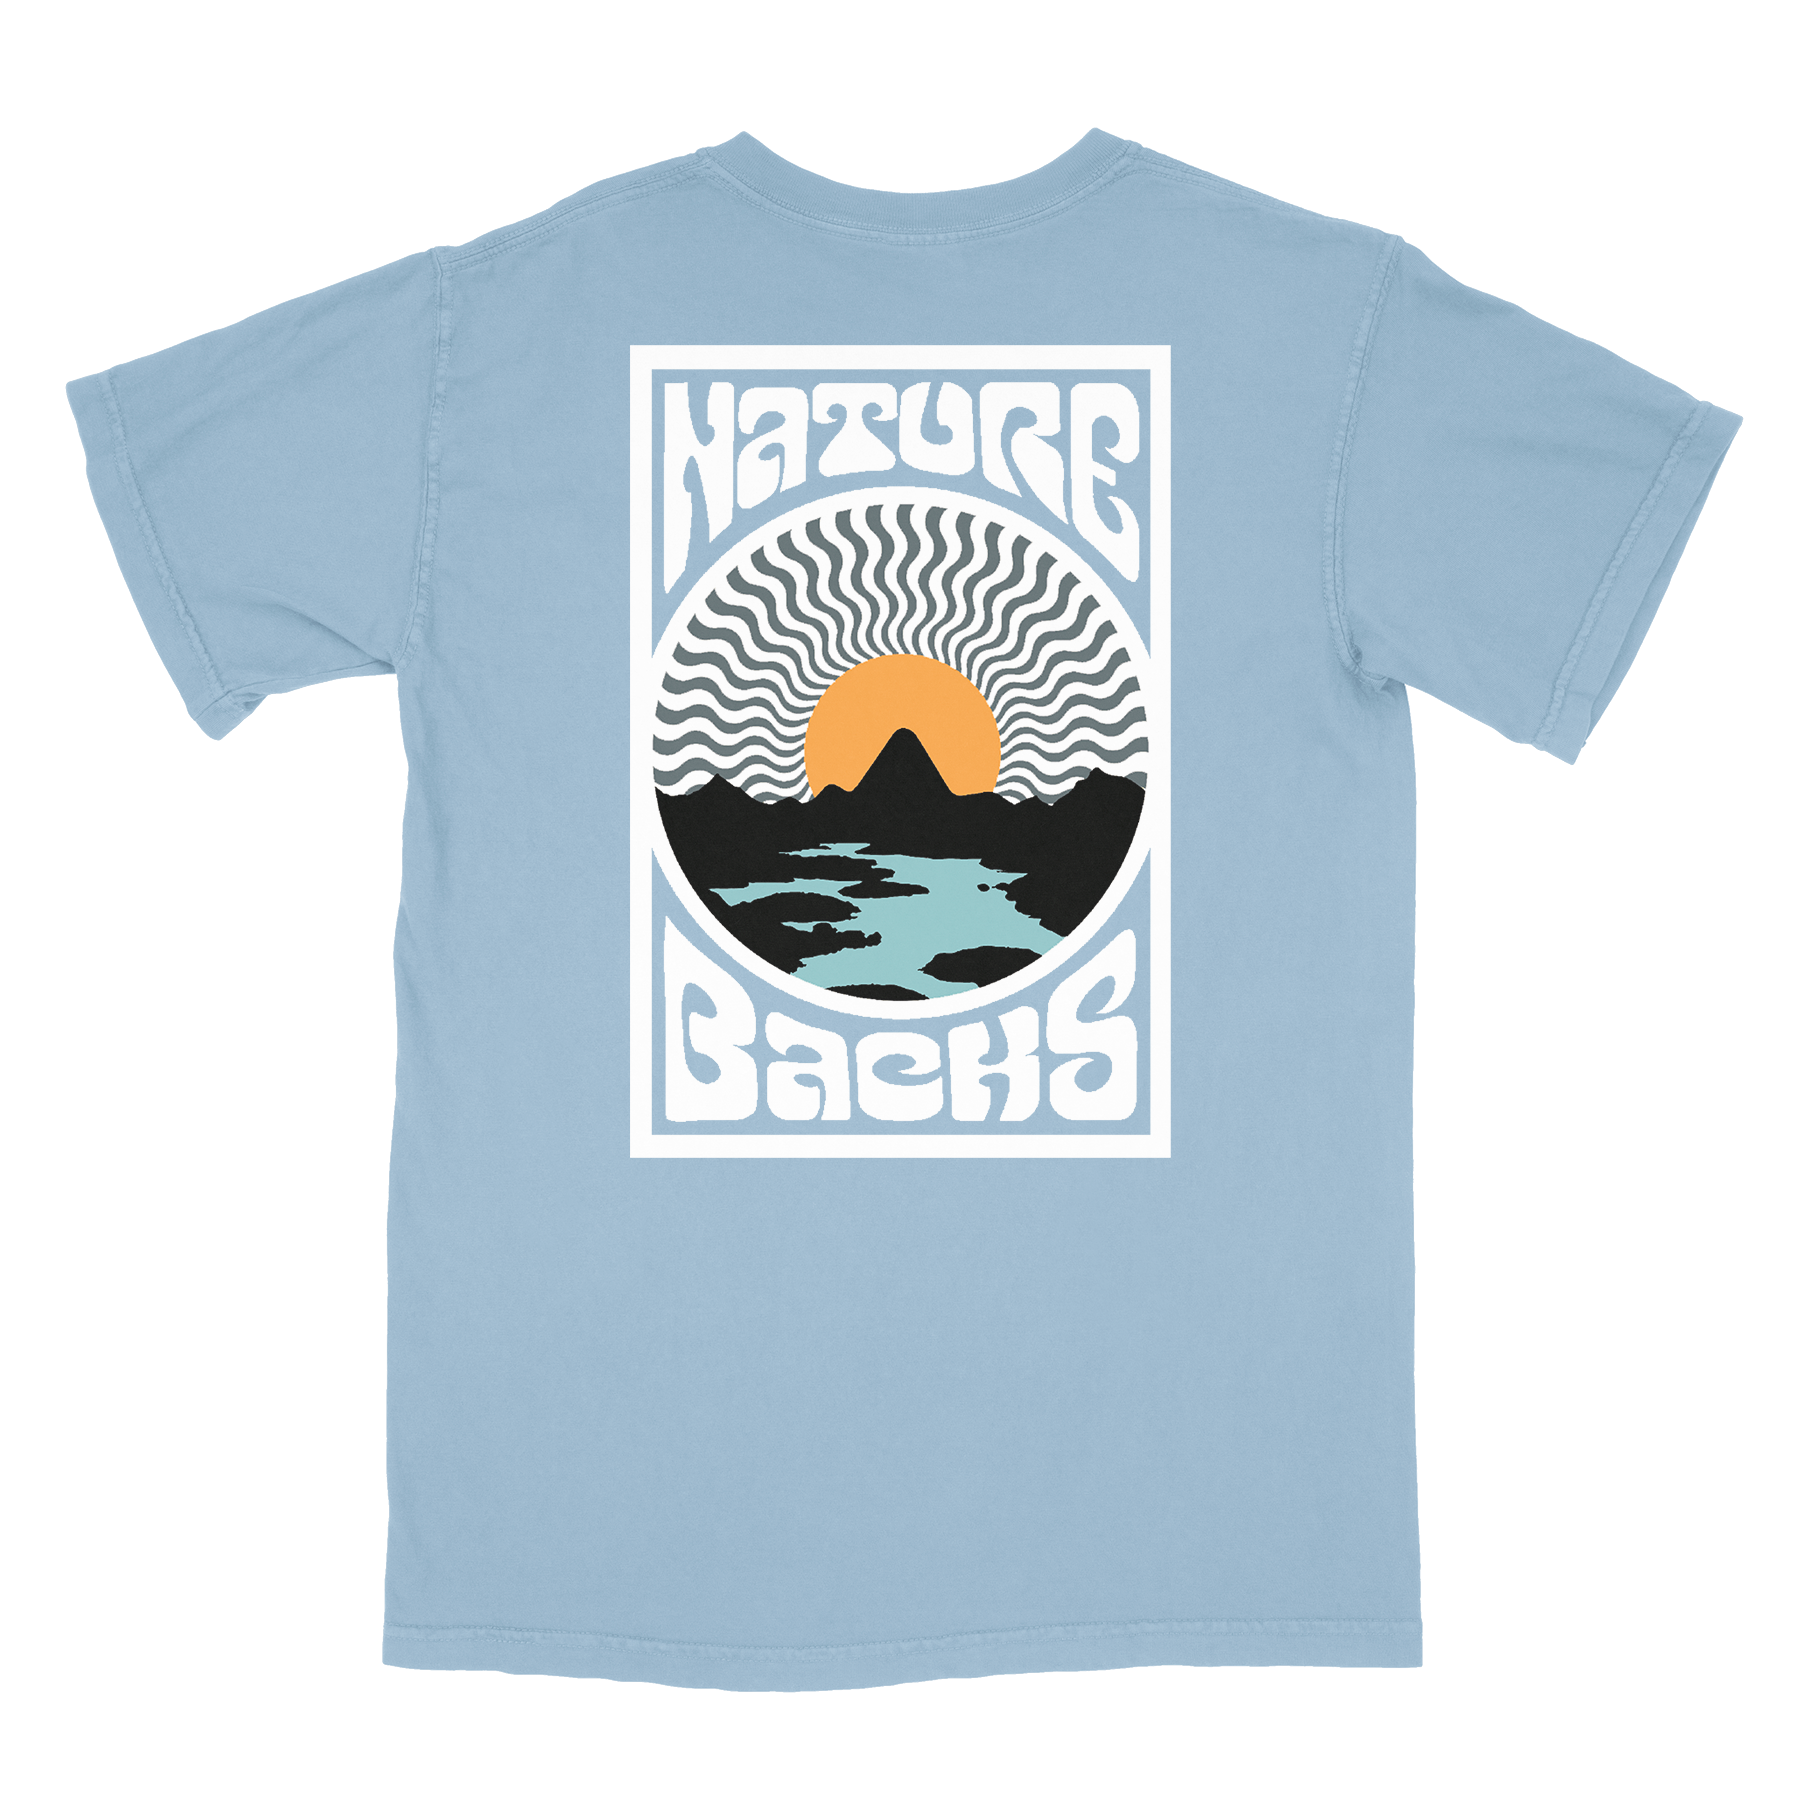 Happy Days Tee Blue Spruce Comfort Colors Aesthetic T-shirt 